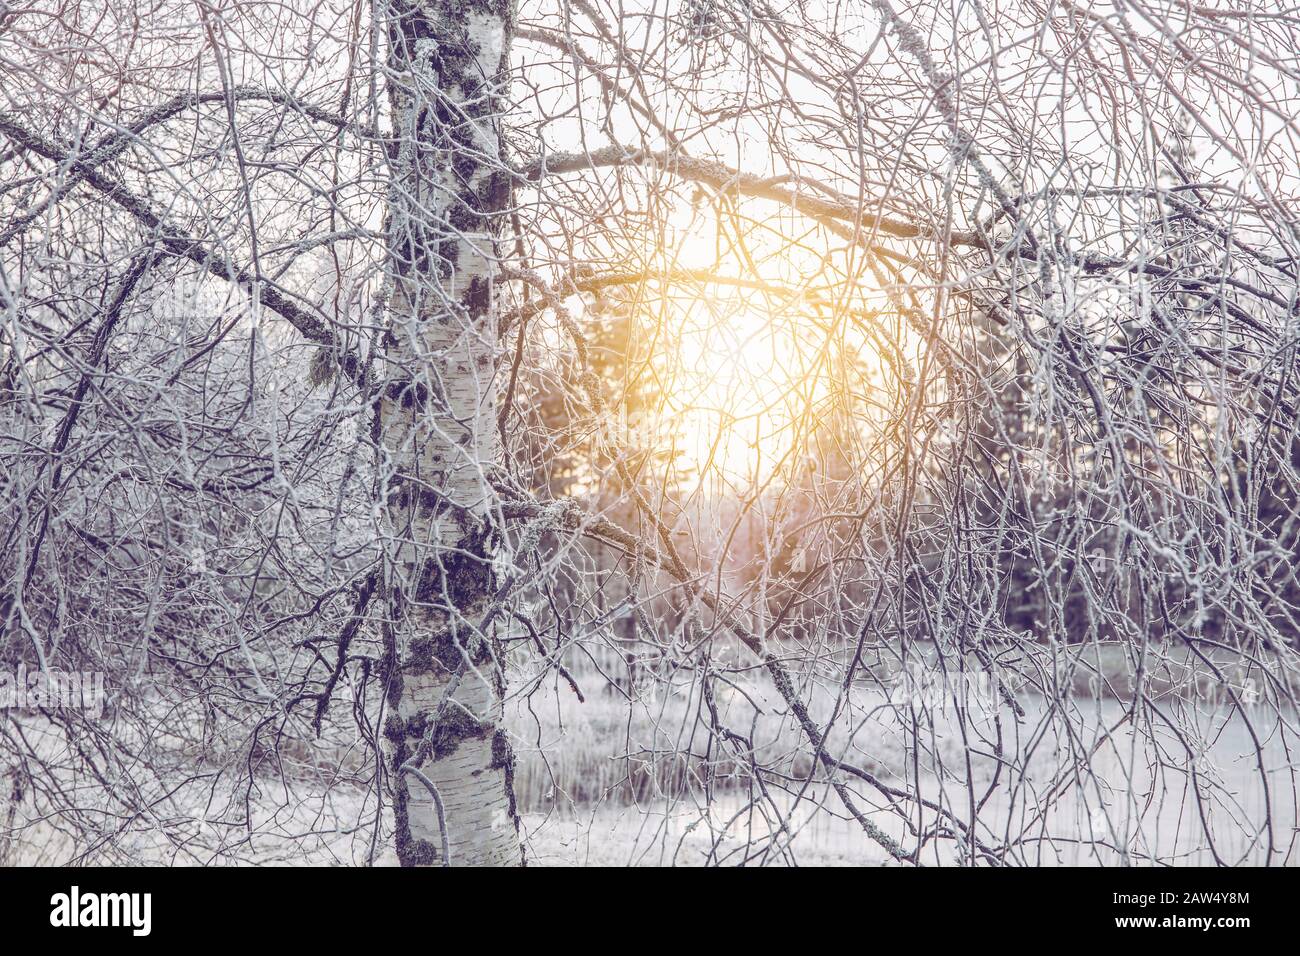 Selective focus on nordic birch tree bark trunk, sun glowing through frosty tree branches by lake in cold winter morning. Stock Photo